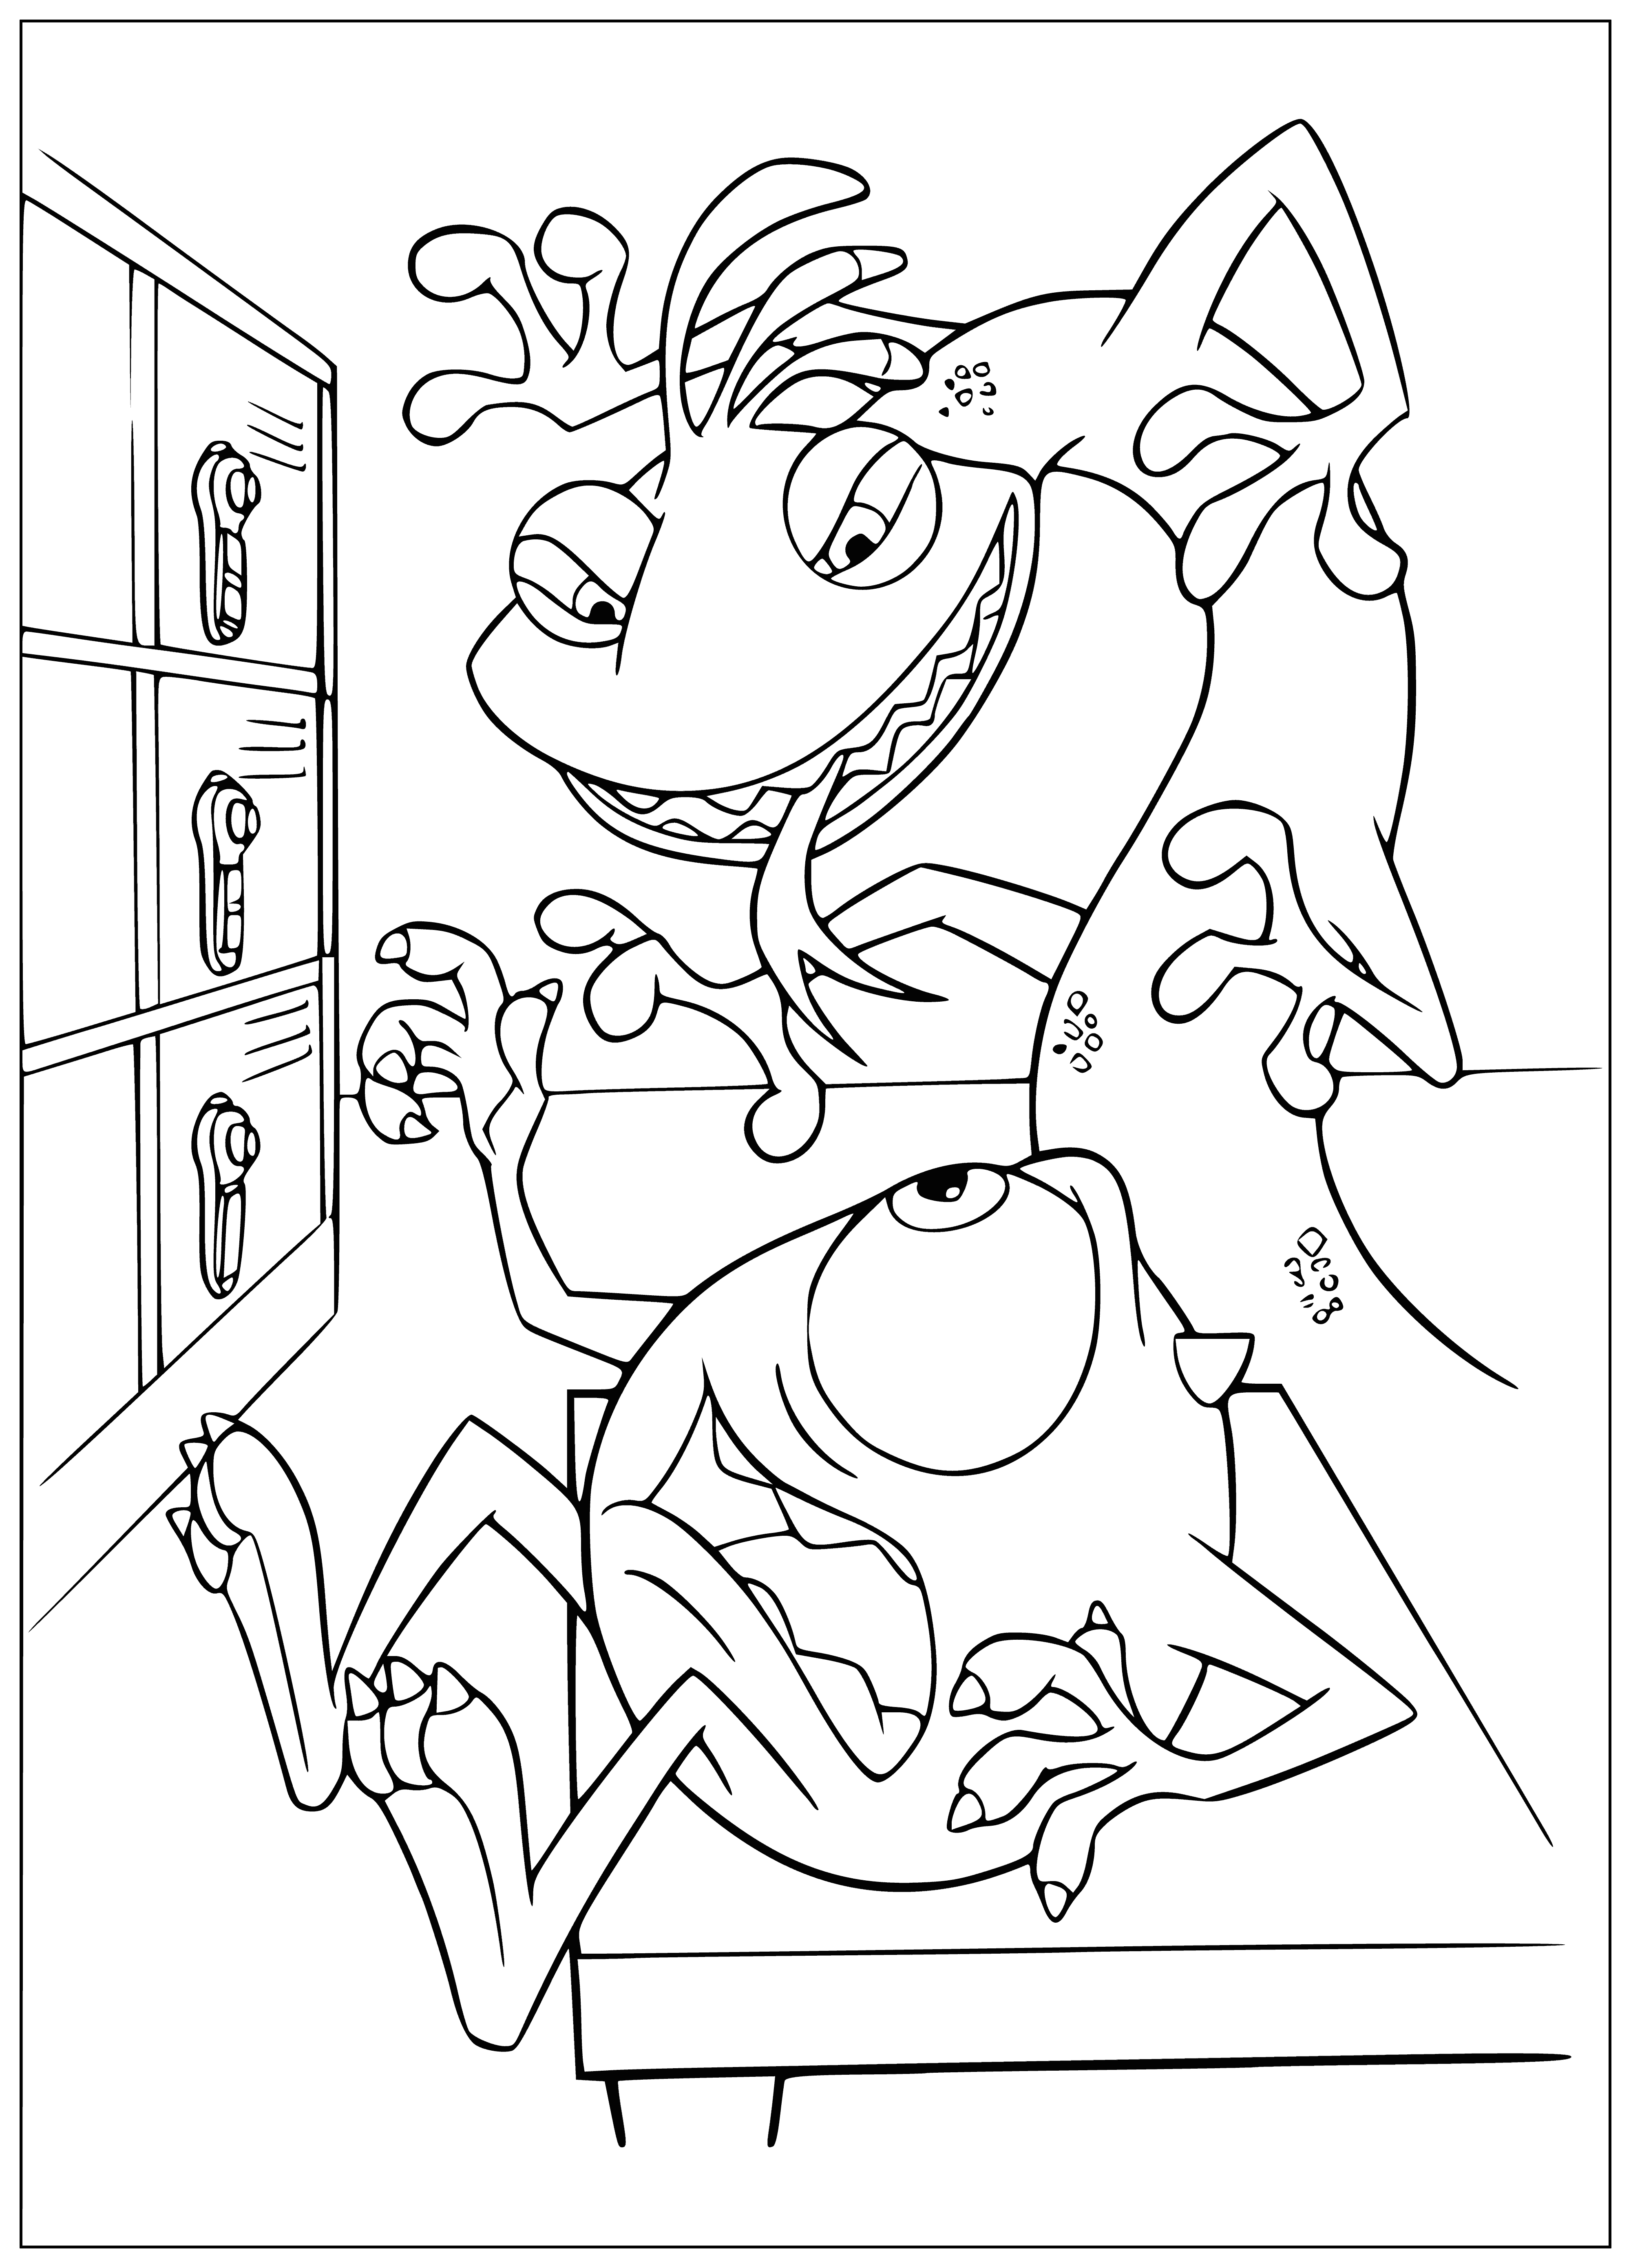 Randall and Mike coloring page